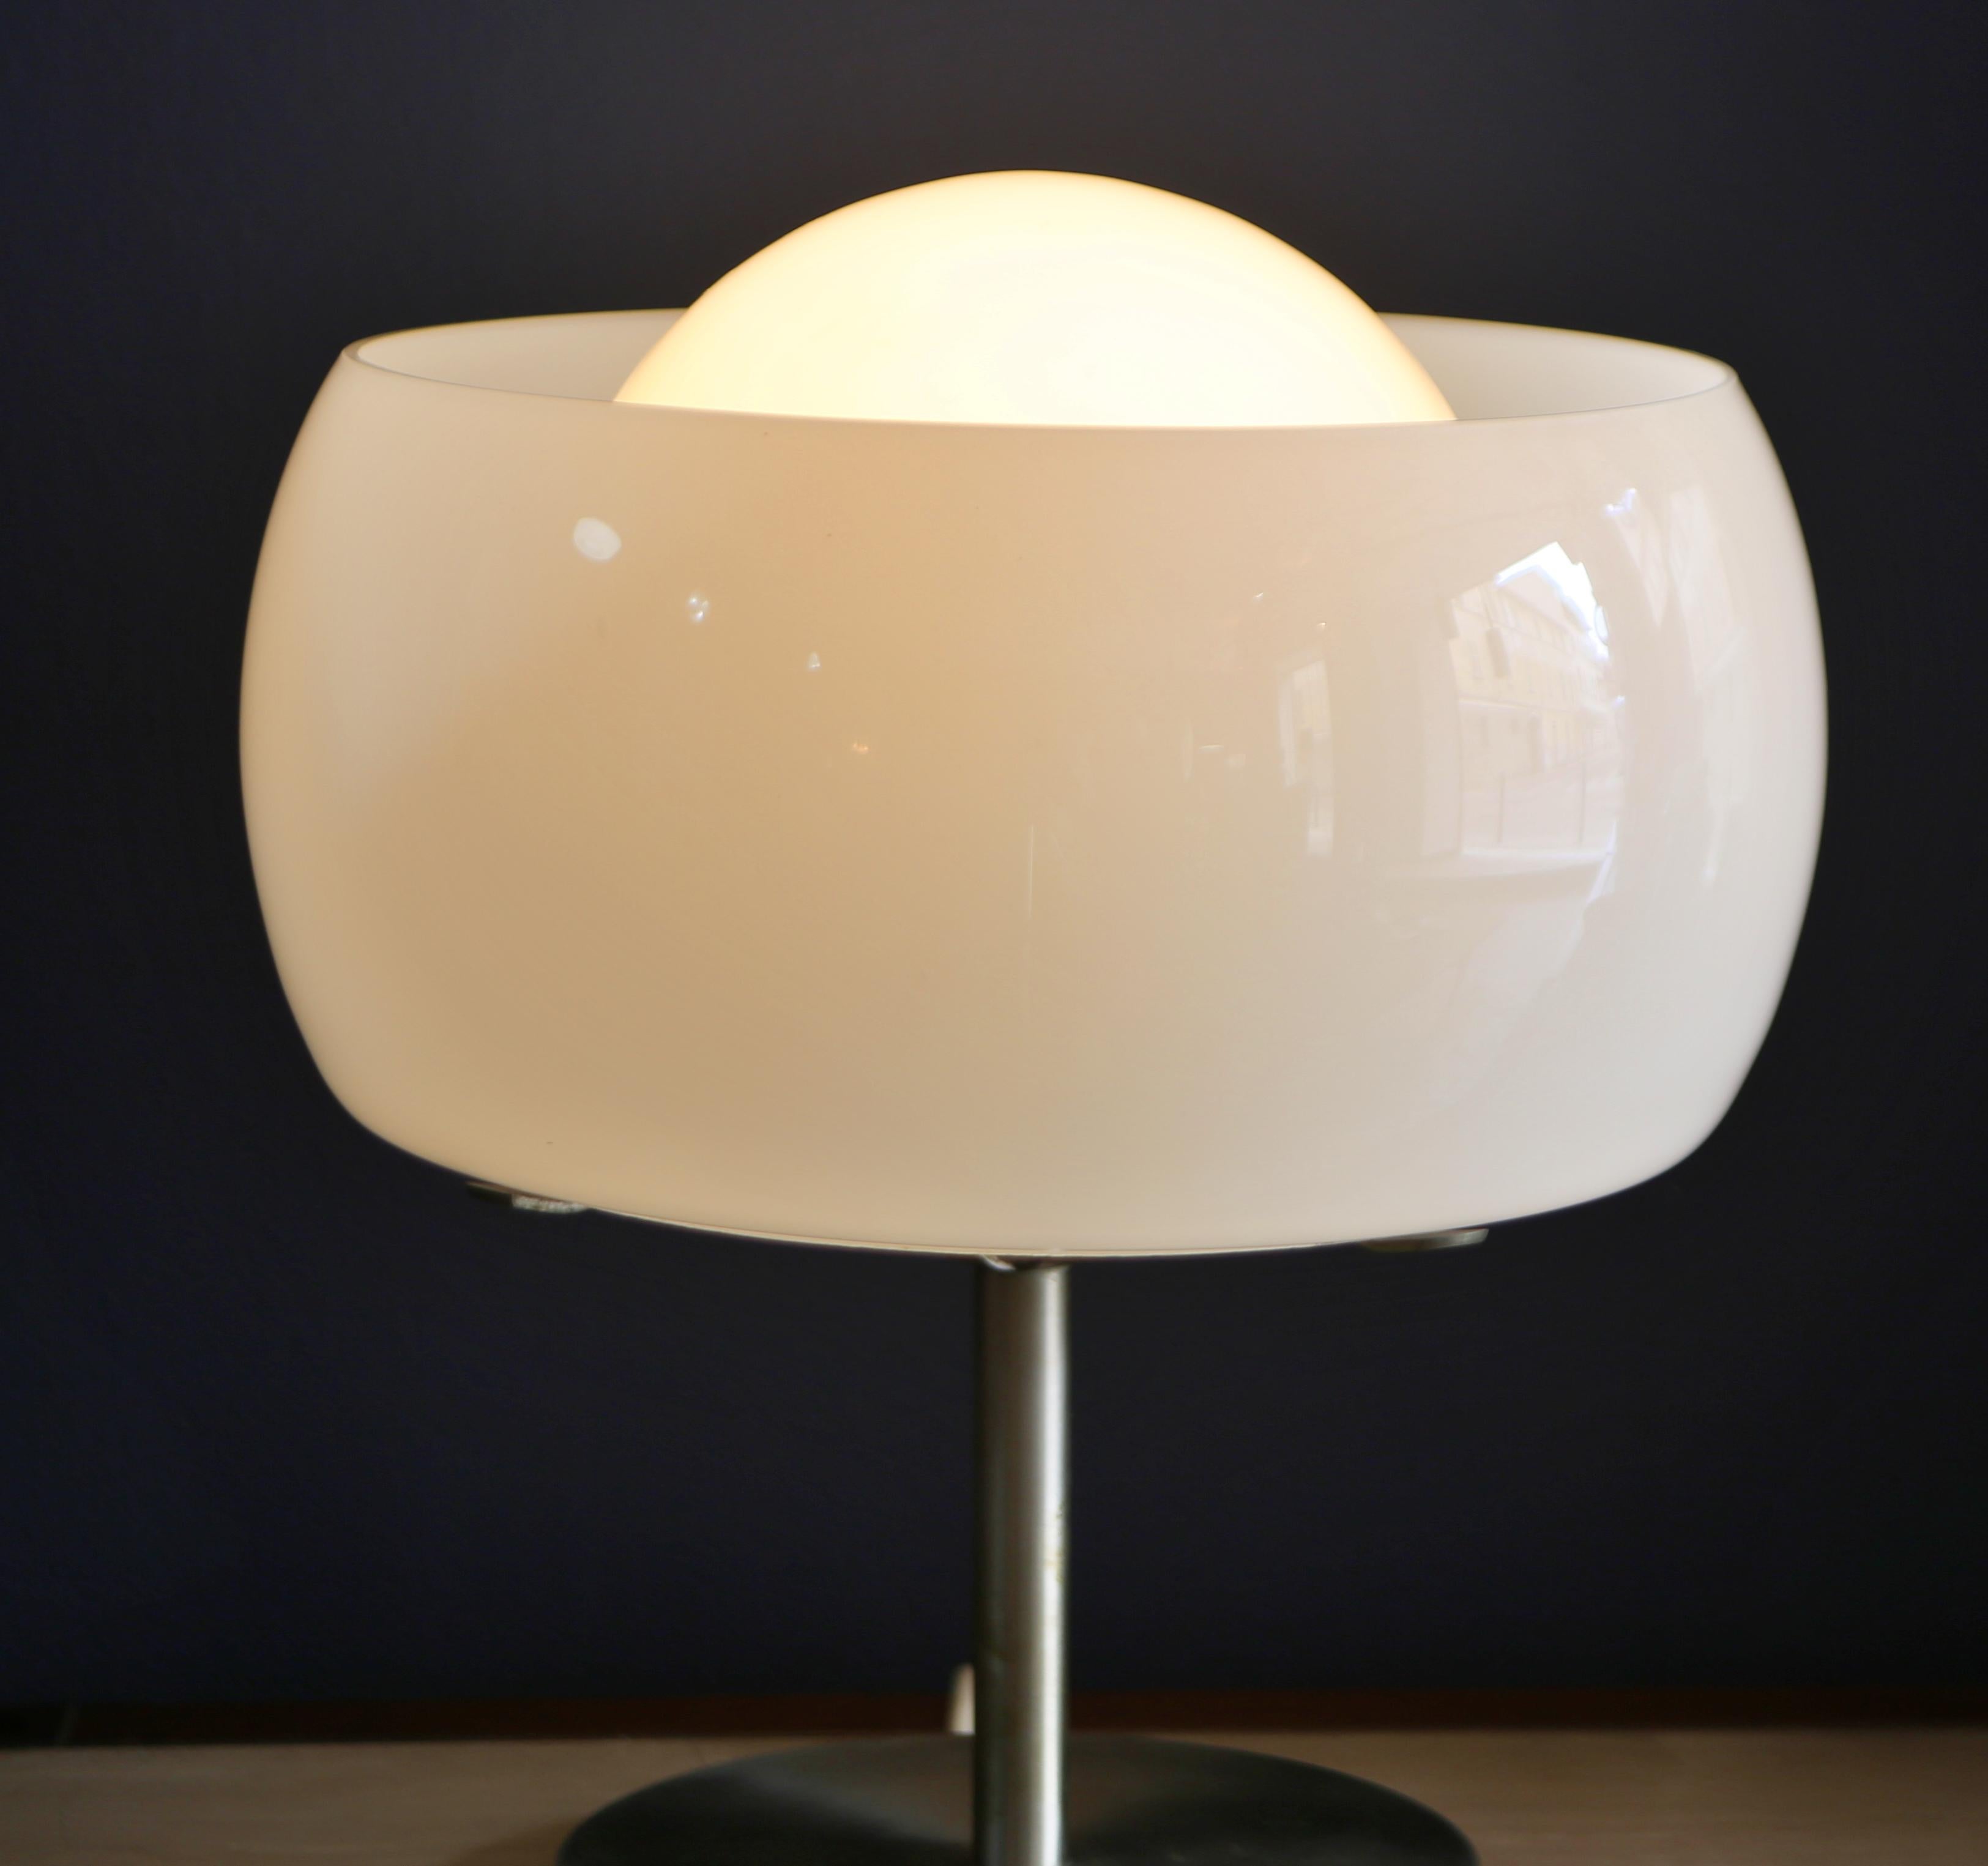 Italian 'Erse' Table Lamp by Vico Magistretti for Artemide 1964 For Sale